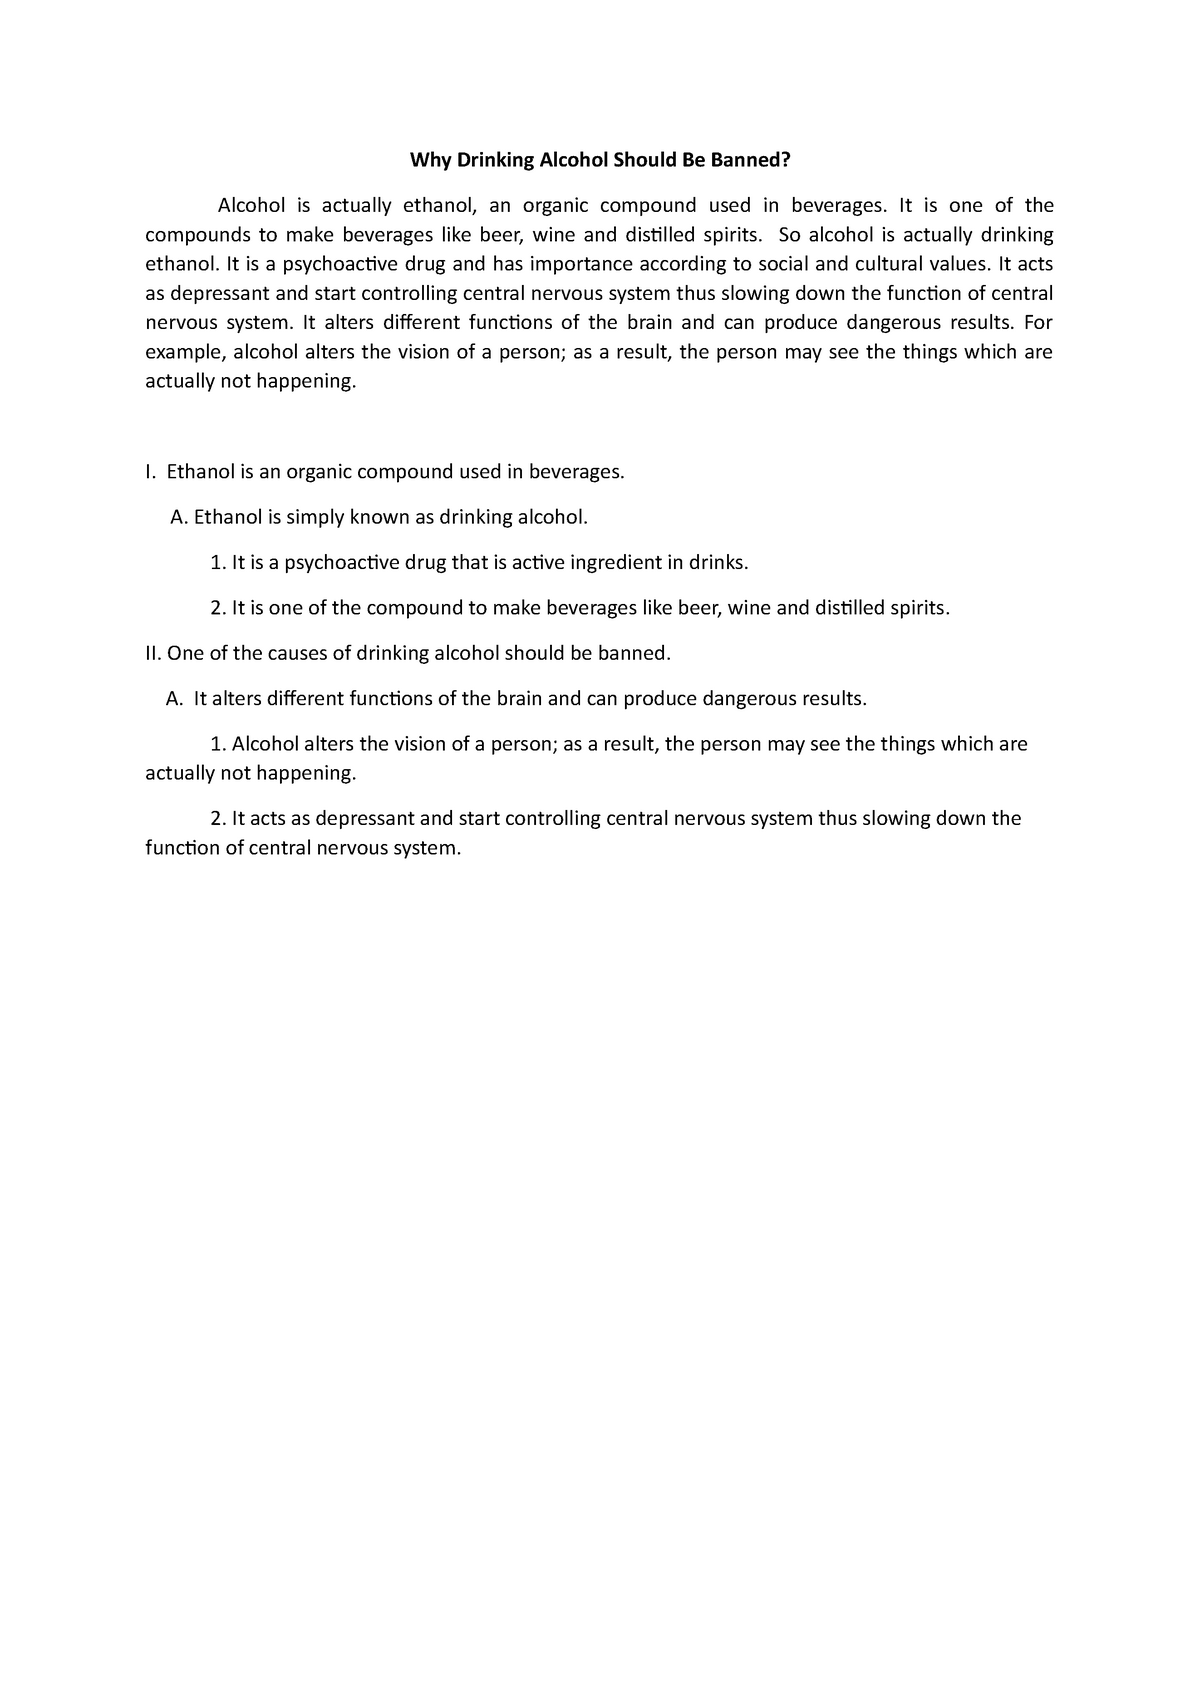 drinking alcohol should be banned essay